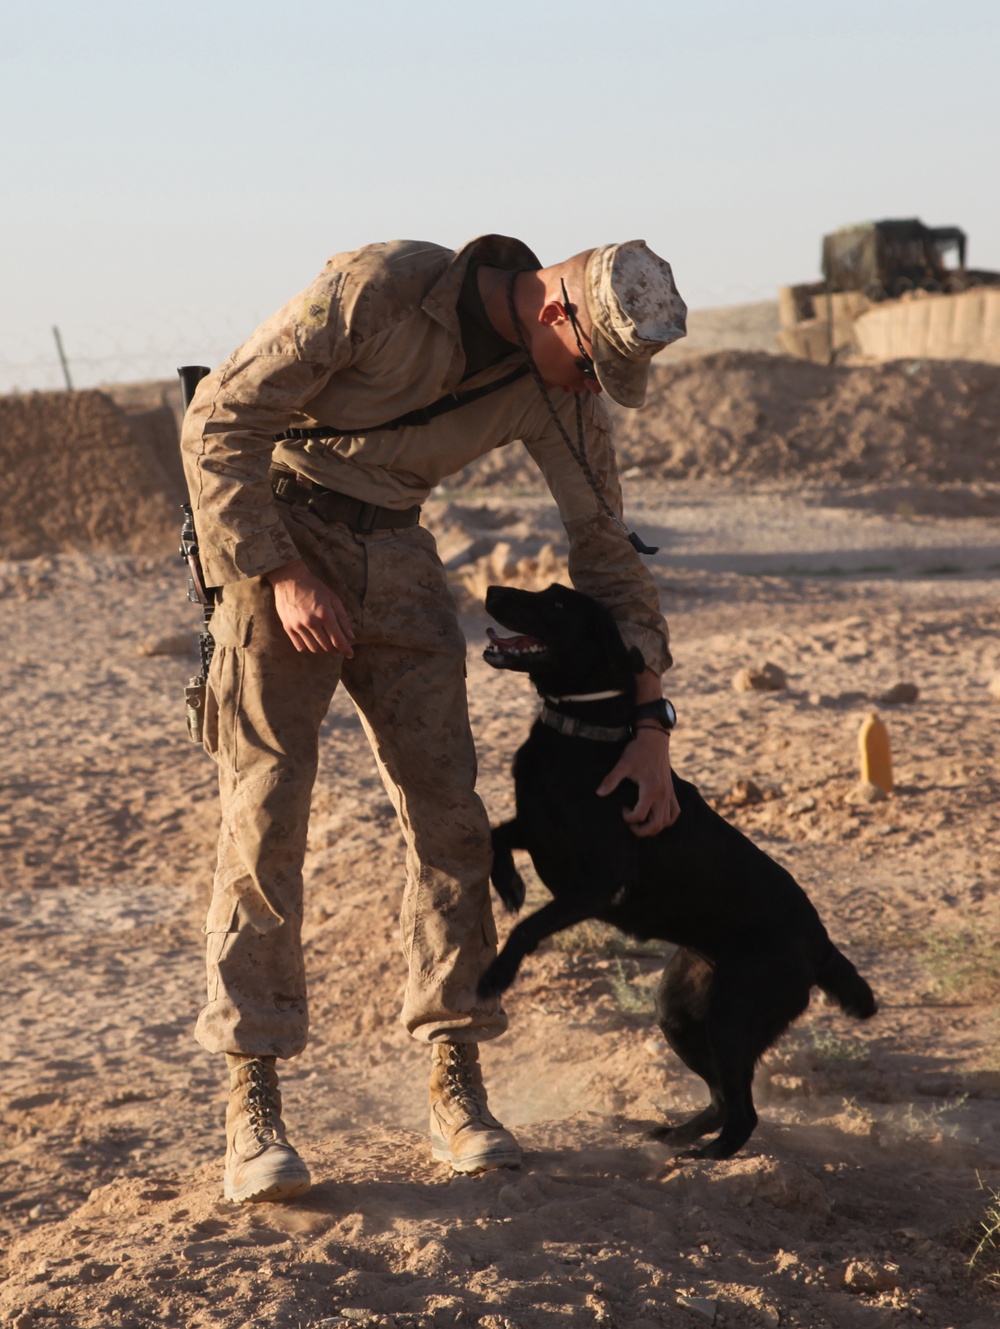 Detection dogs lead the way for 3/6 Marines